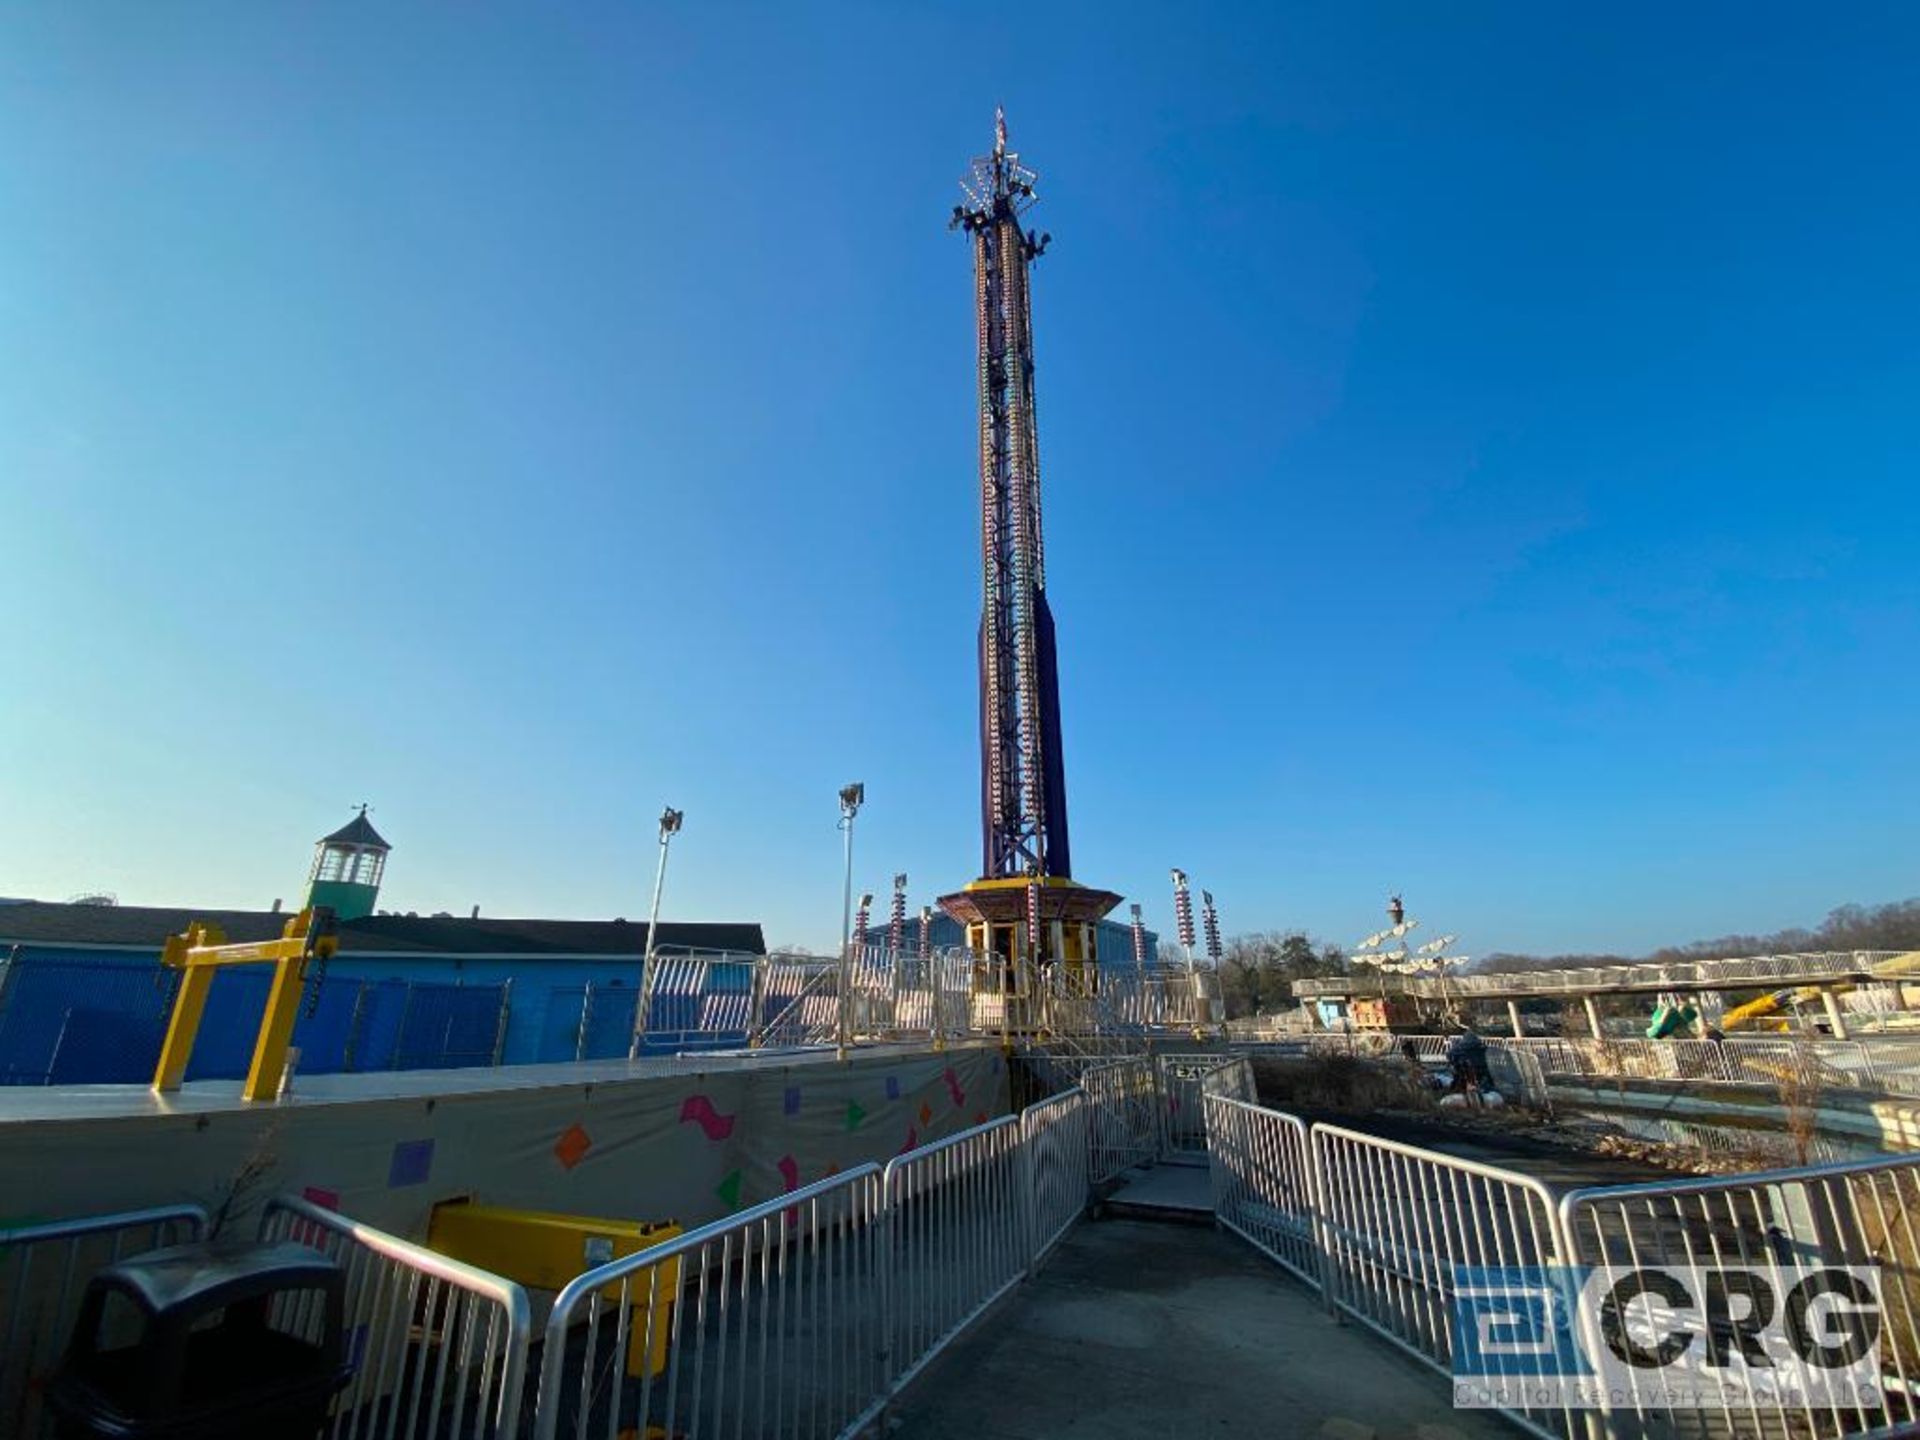 Thunder Drop T/A trailer mounted drop tower with elevated steel fold away entrance and exit platform